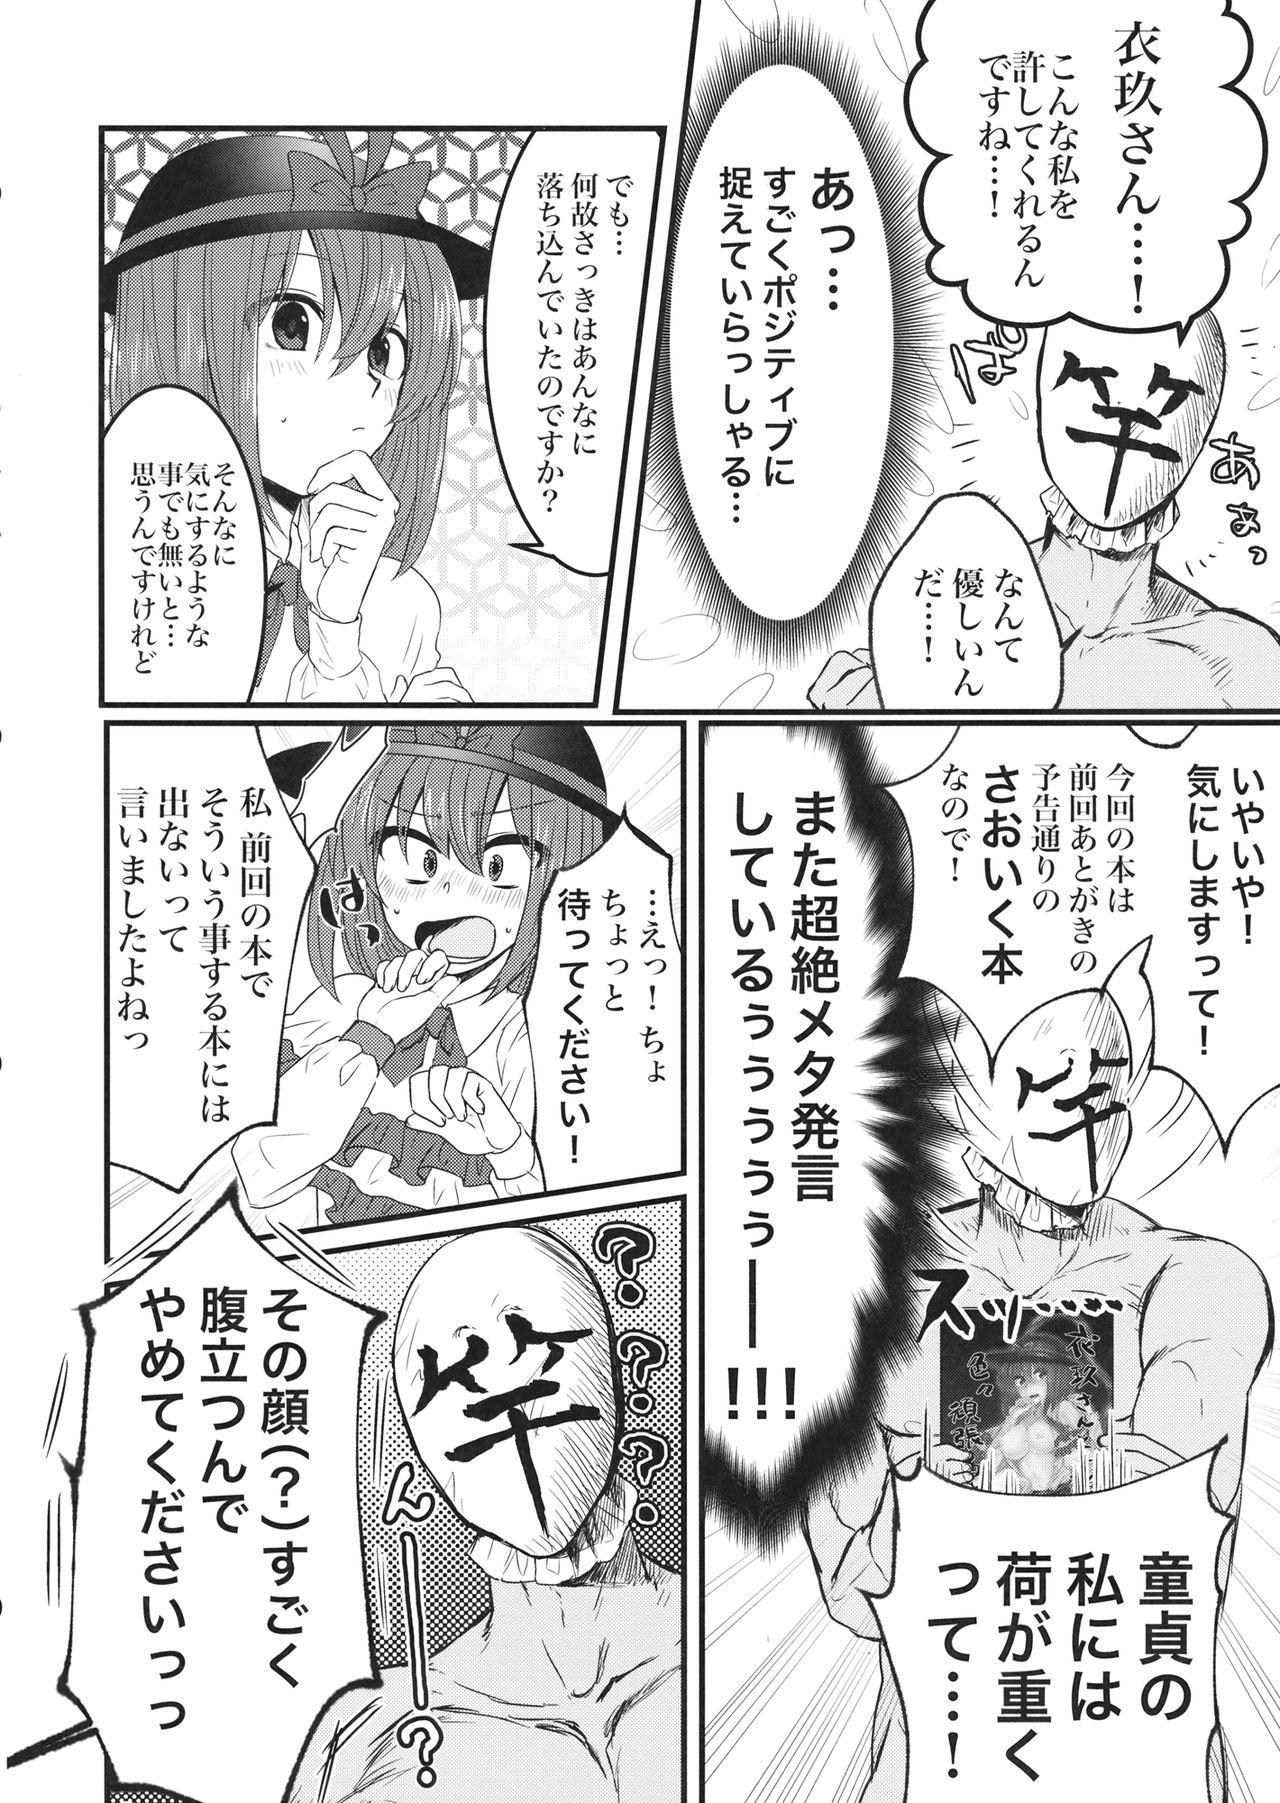 Game 衣玖さんと一緒に色々頑張る本 - Touhou project Private Sex - Page 7